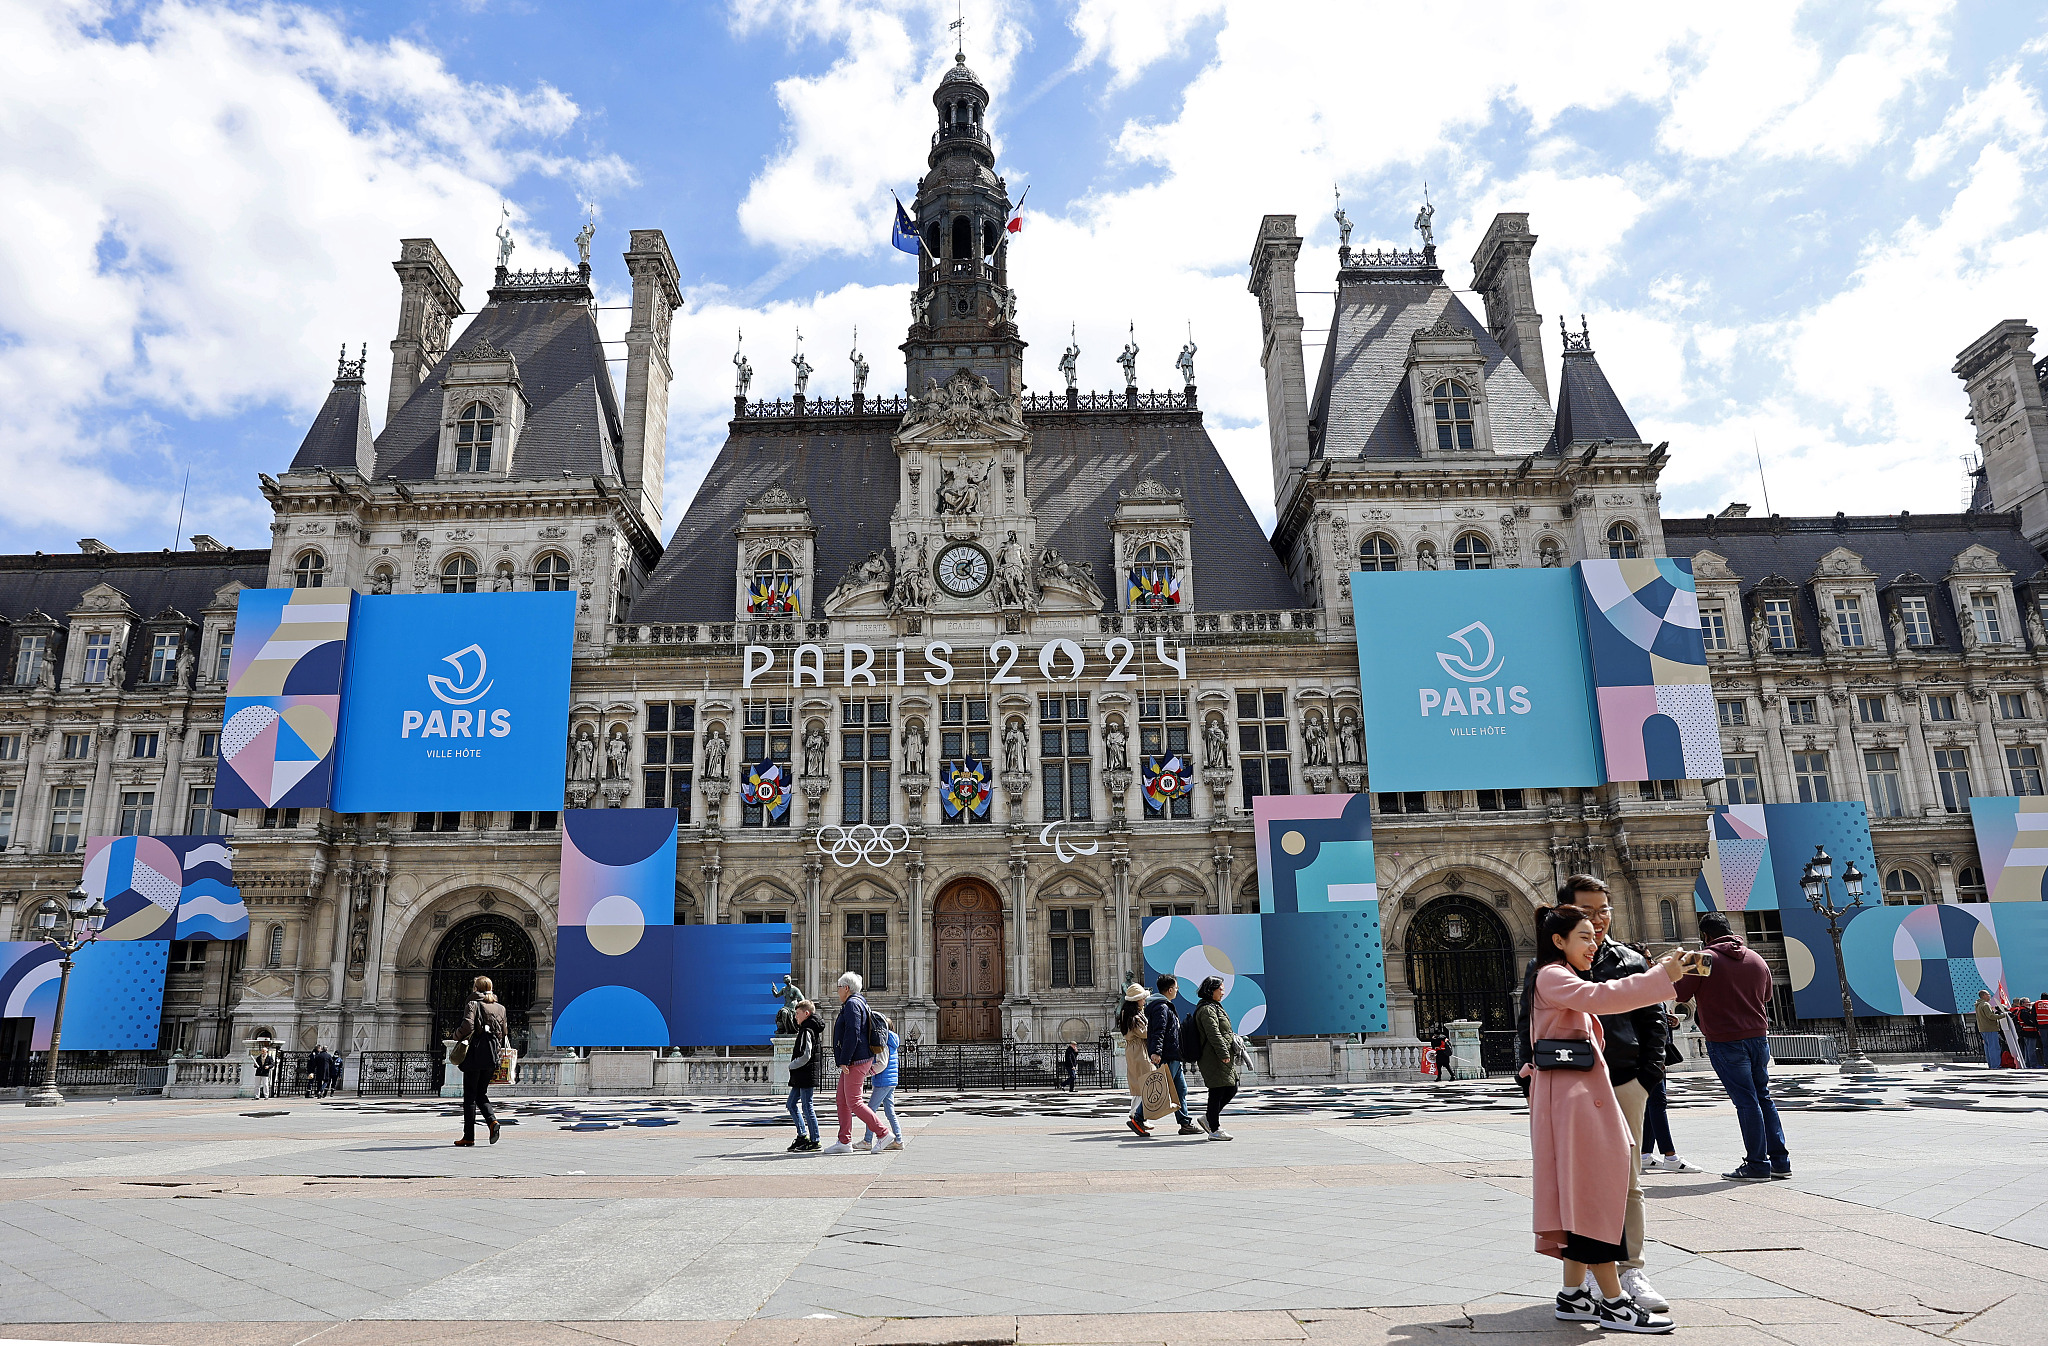 Paris 2024 logo and posters of the Olympic and Paralympic Games are displayed on the façade of the town hall in Paris, France, April 25, 2024. /CFP